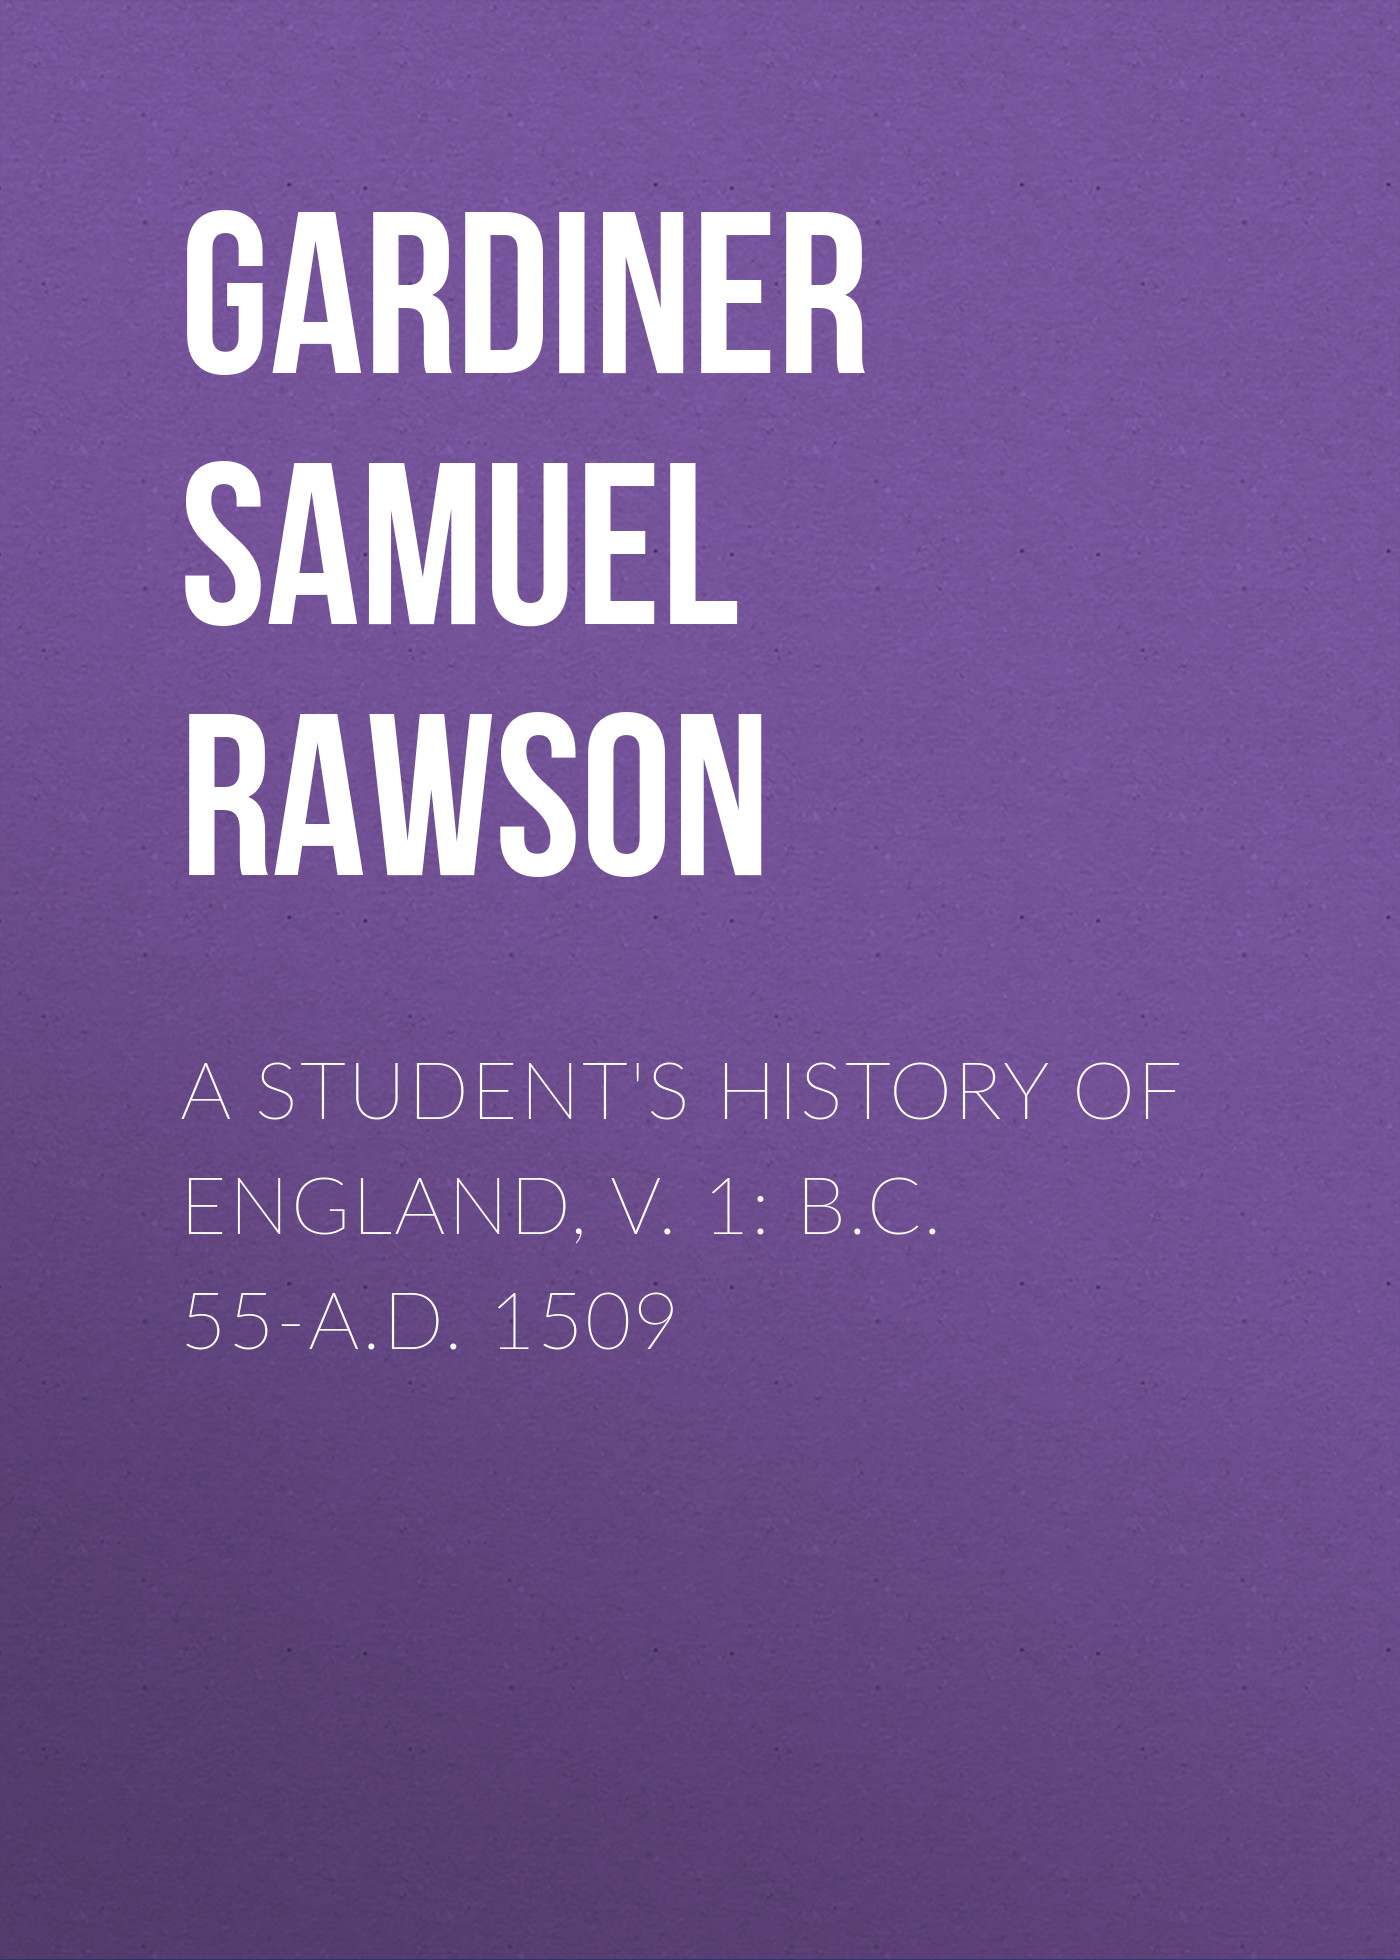 A Student\'s History of England, v. 1: B.C. 55-A.D. 1509